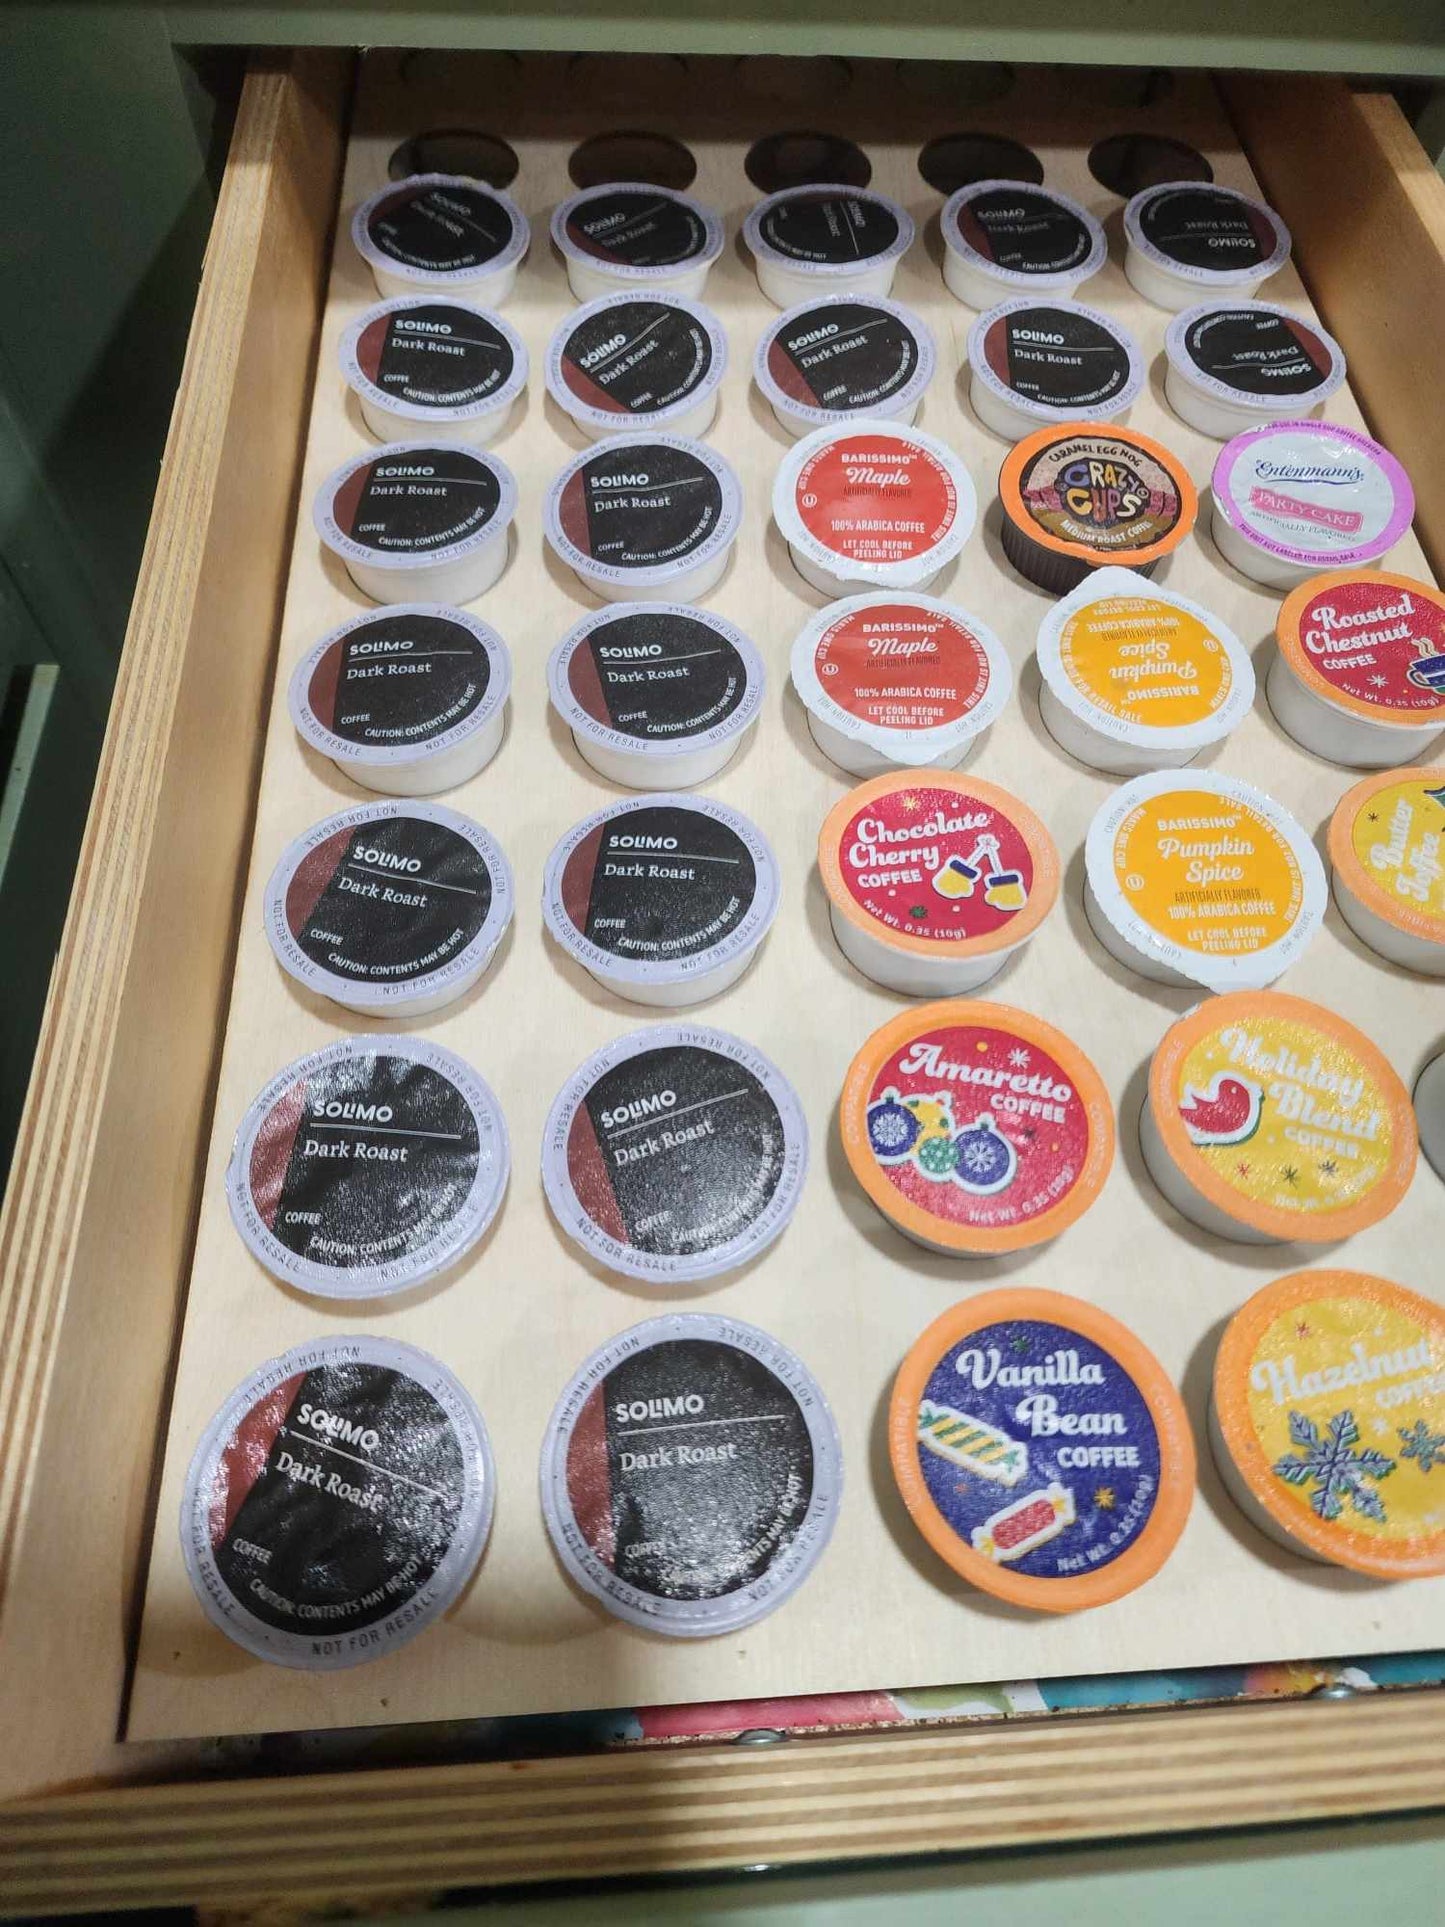 Shows a coffee k cup drawer organizer full of coffee pods